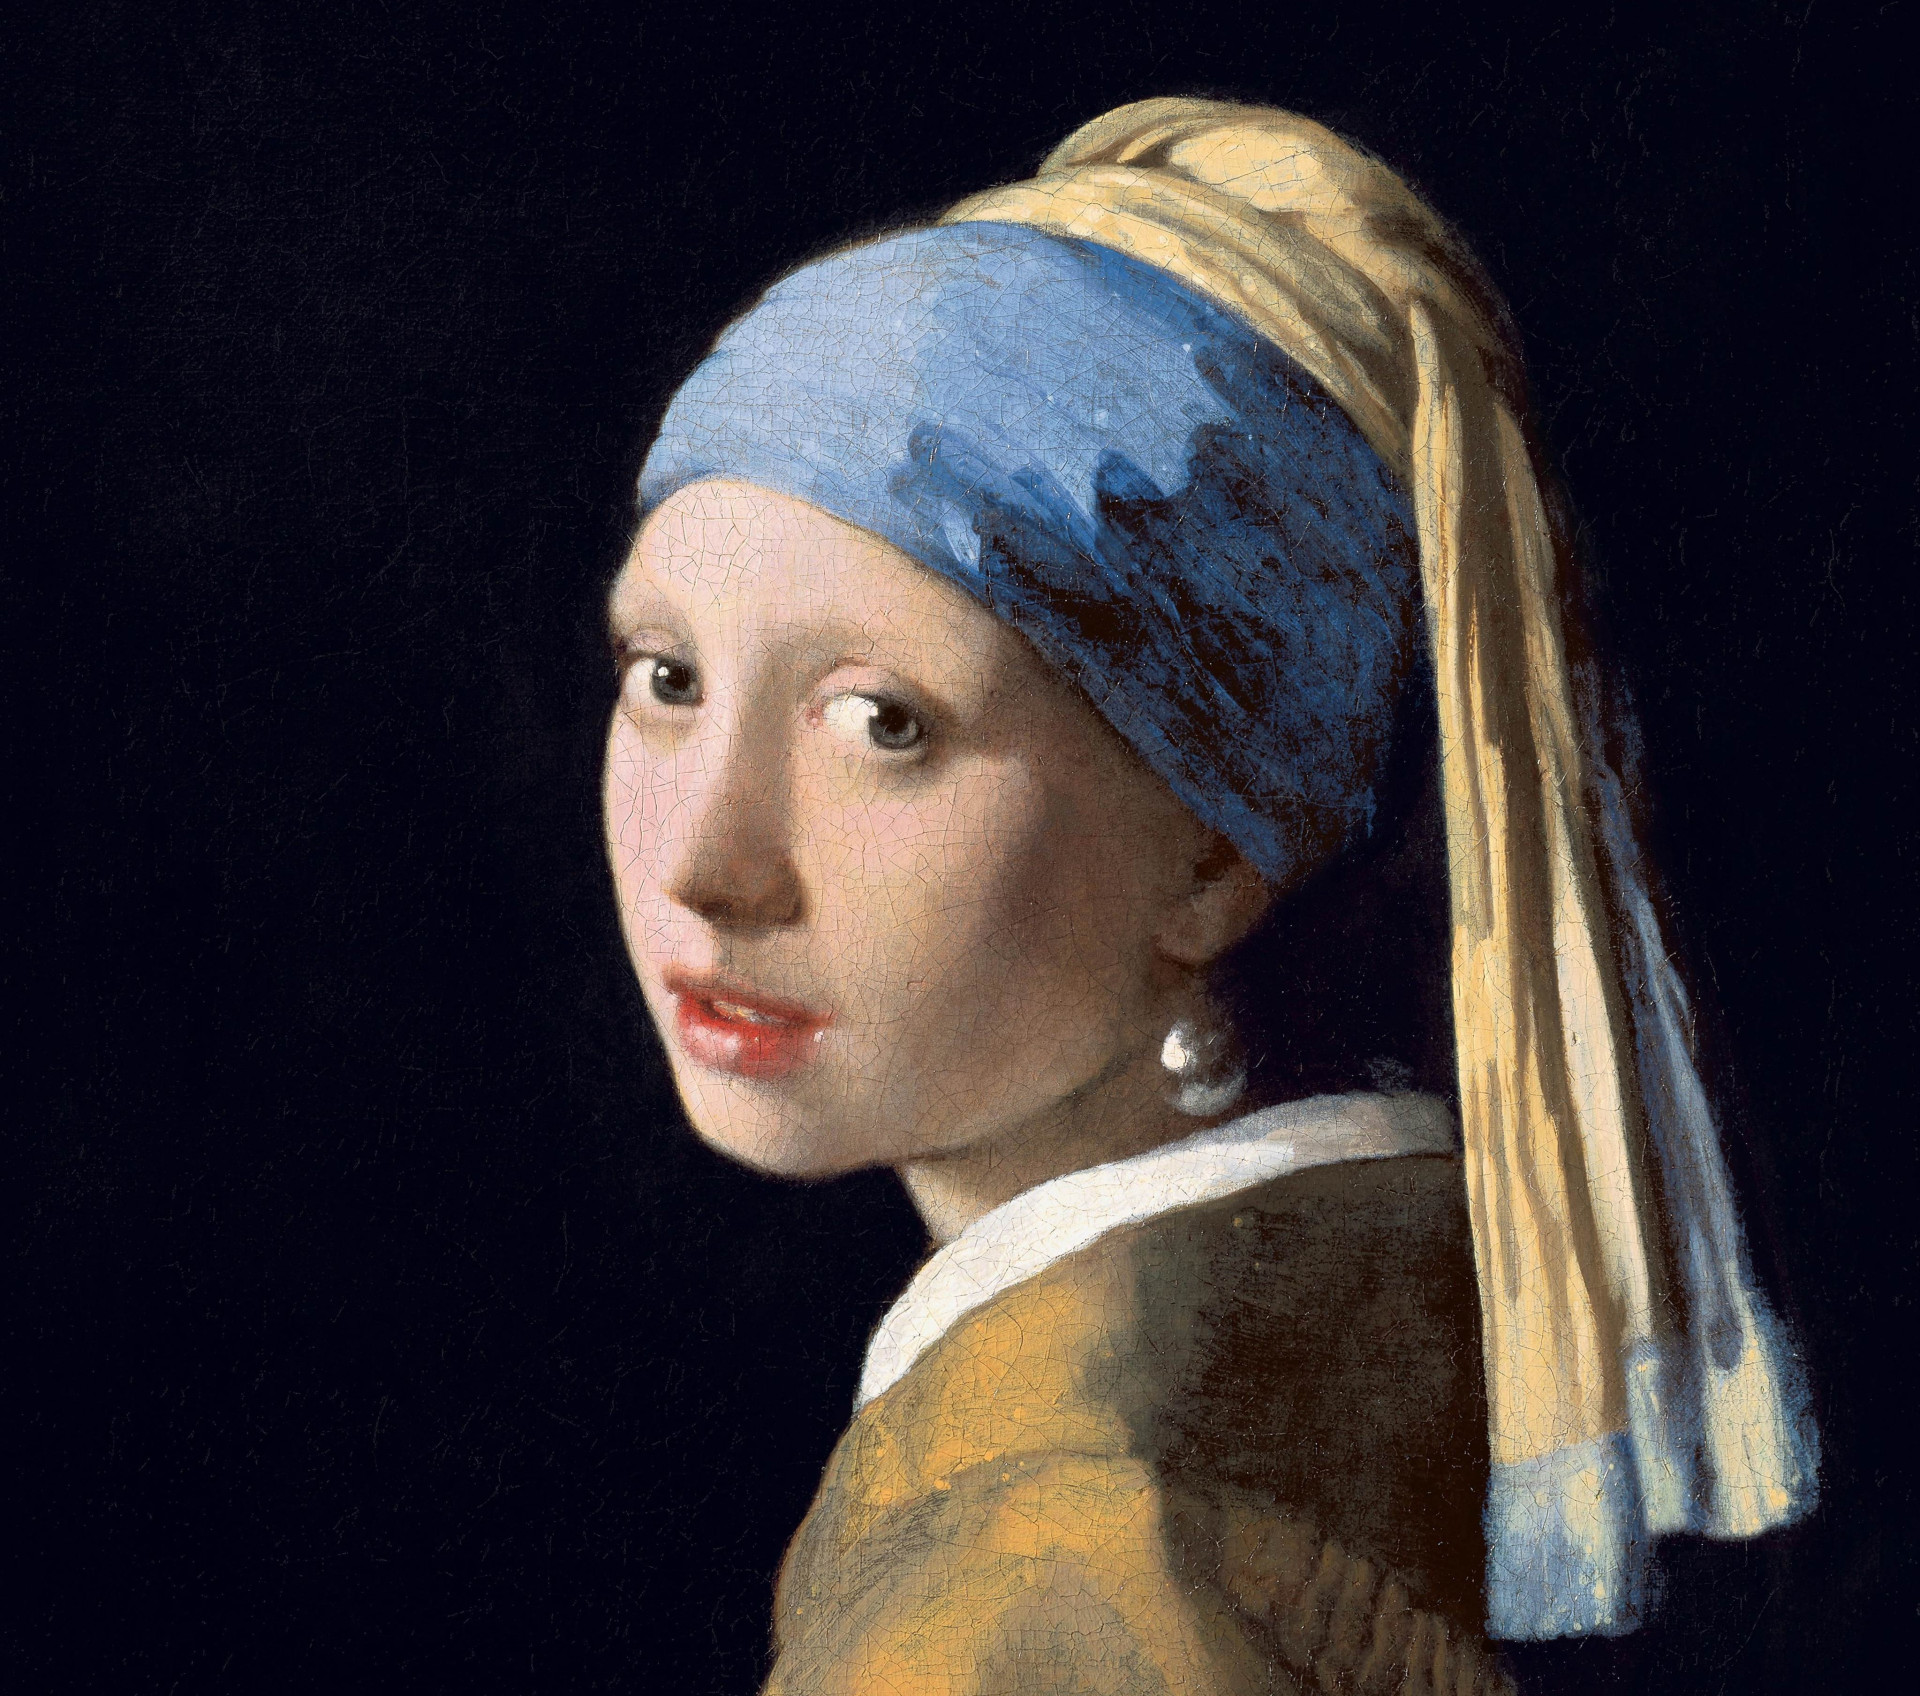 <p>'Girl with a Pearl Earring,' an artwork by Johannes Vermeer, has fascinated viewers for many years. Nevertheless, the question remains: what is hanging from her ear? According to some, the girl may not be wearing an earring at all. By examining closely, one can observe that there is no visible loop connecting the object to her ear. Consequently, many perceive the painting as an optical trick or illusion.</p><p>You may also like:<a href="https://www.starsinsider.com/n/269366?utm_source=msn.com&utm_medium=display&utm_campaign=referral_description&utm_content=622678v1en-en"> The mysterious history behind Japan's Devil's Sea</a></p>